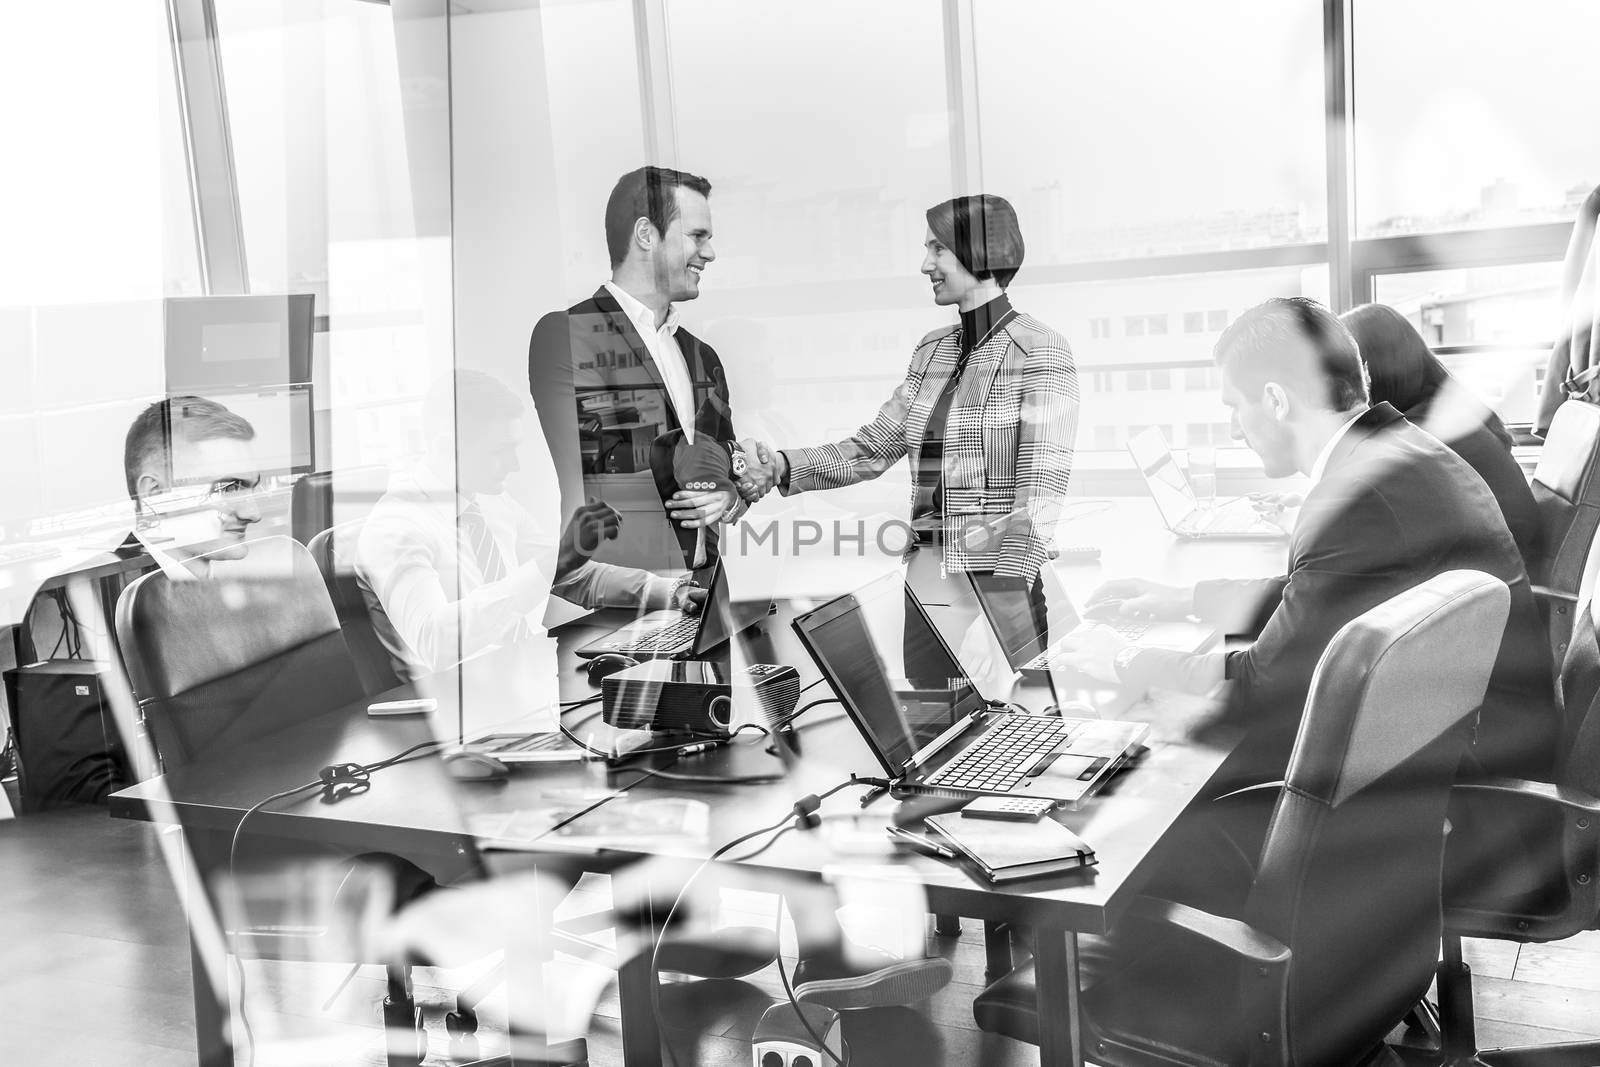 Sealing a deal. Business people shaking hands, finishing up meeting in corporate office. Businessmen working on laptops seen in glass reflection. Business concept in black and white.